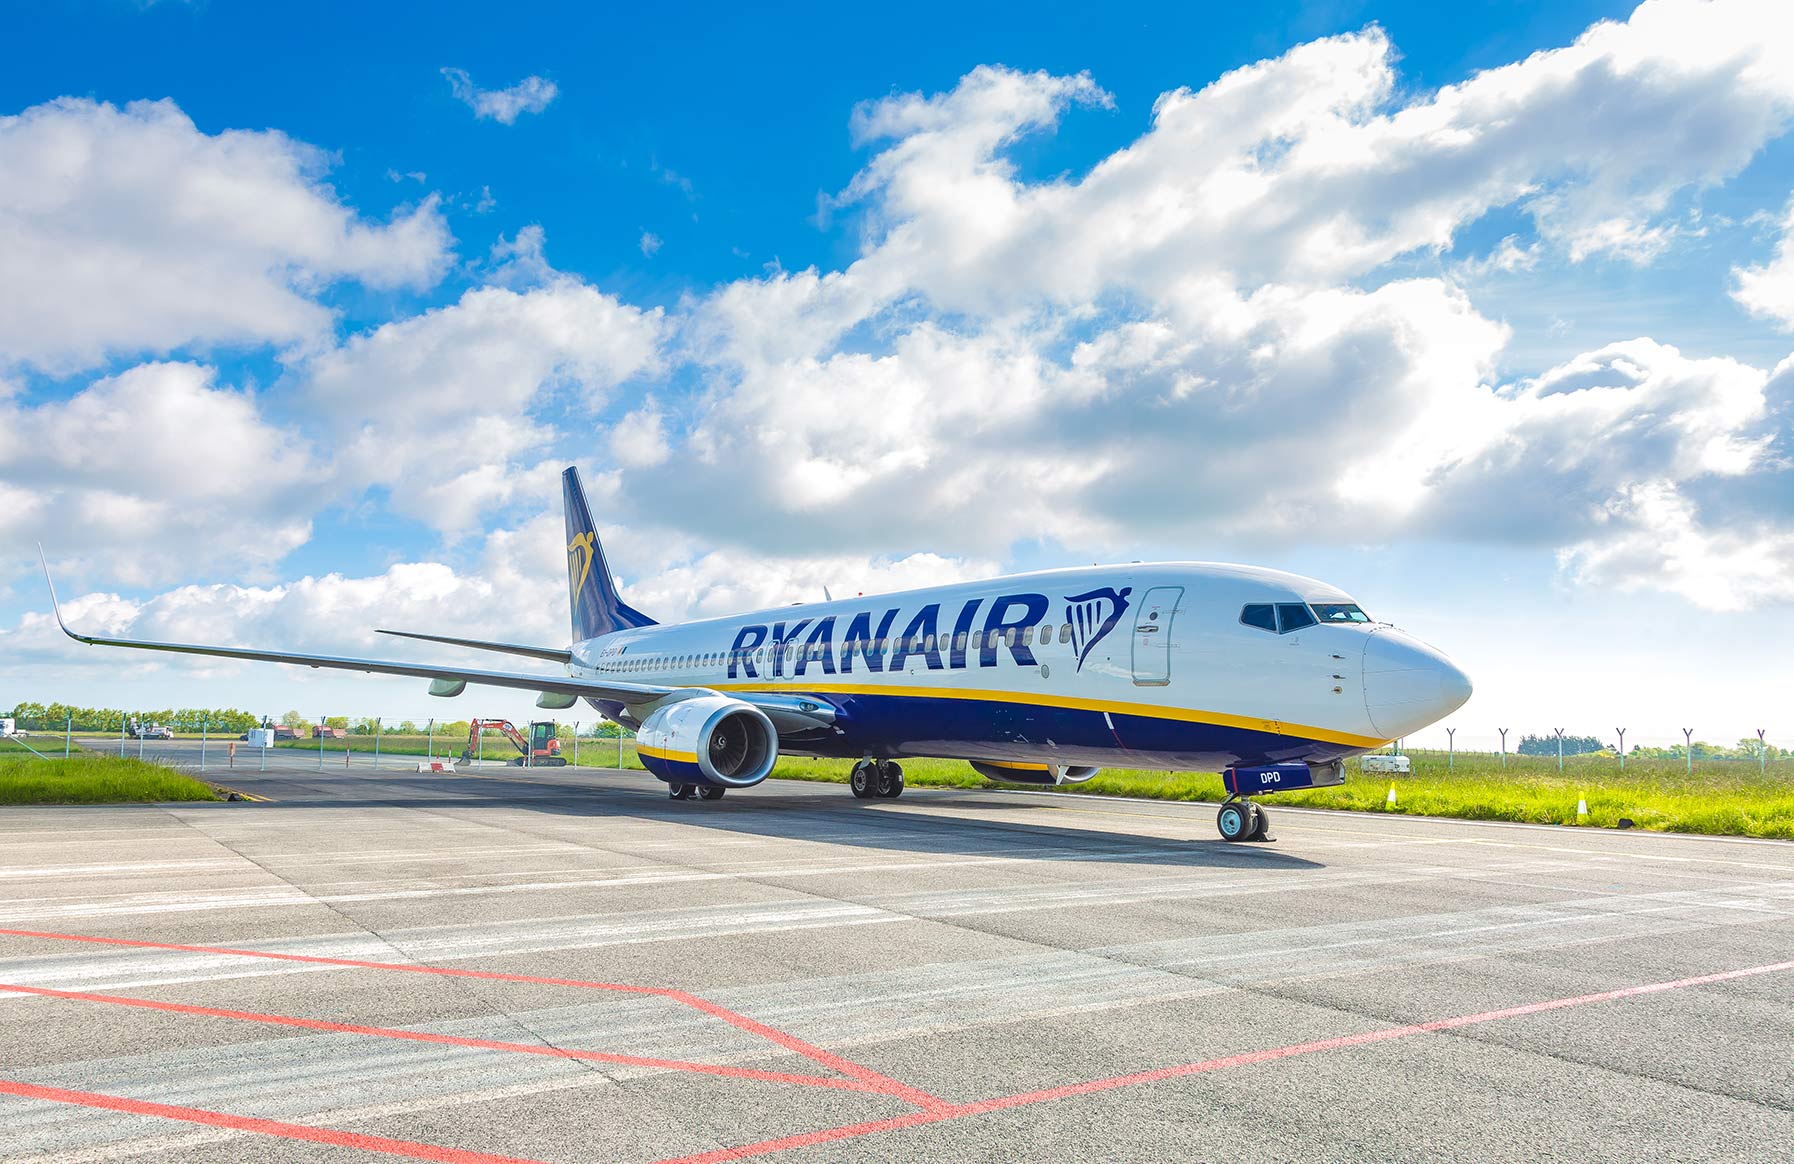 Crew strikes threaten disruption to around 300 Ryanair flights to and from the Canary Islands